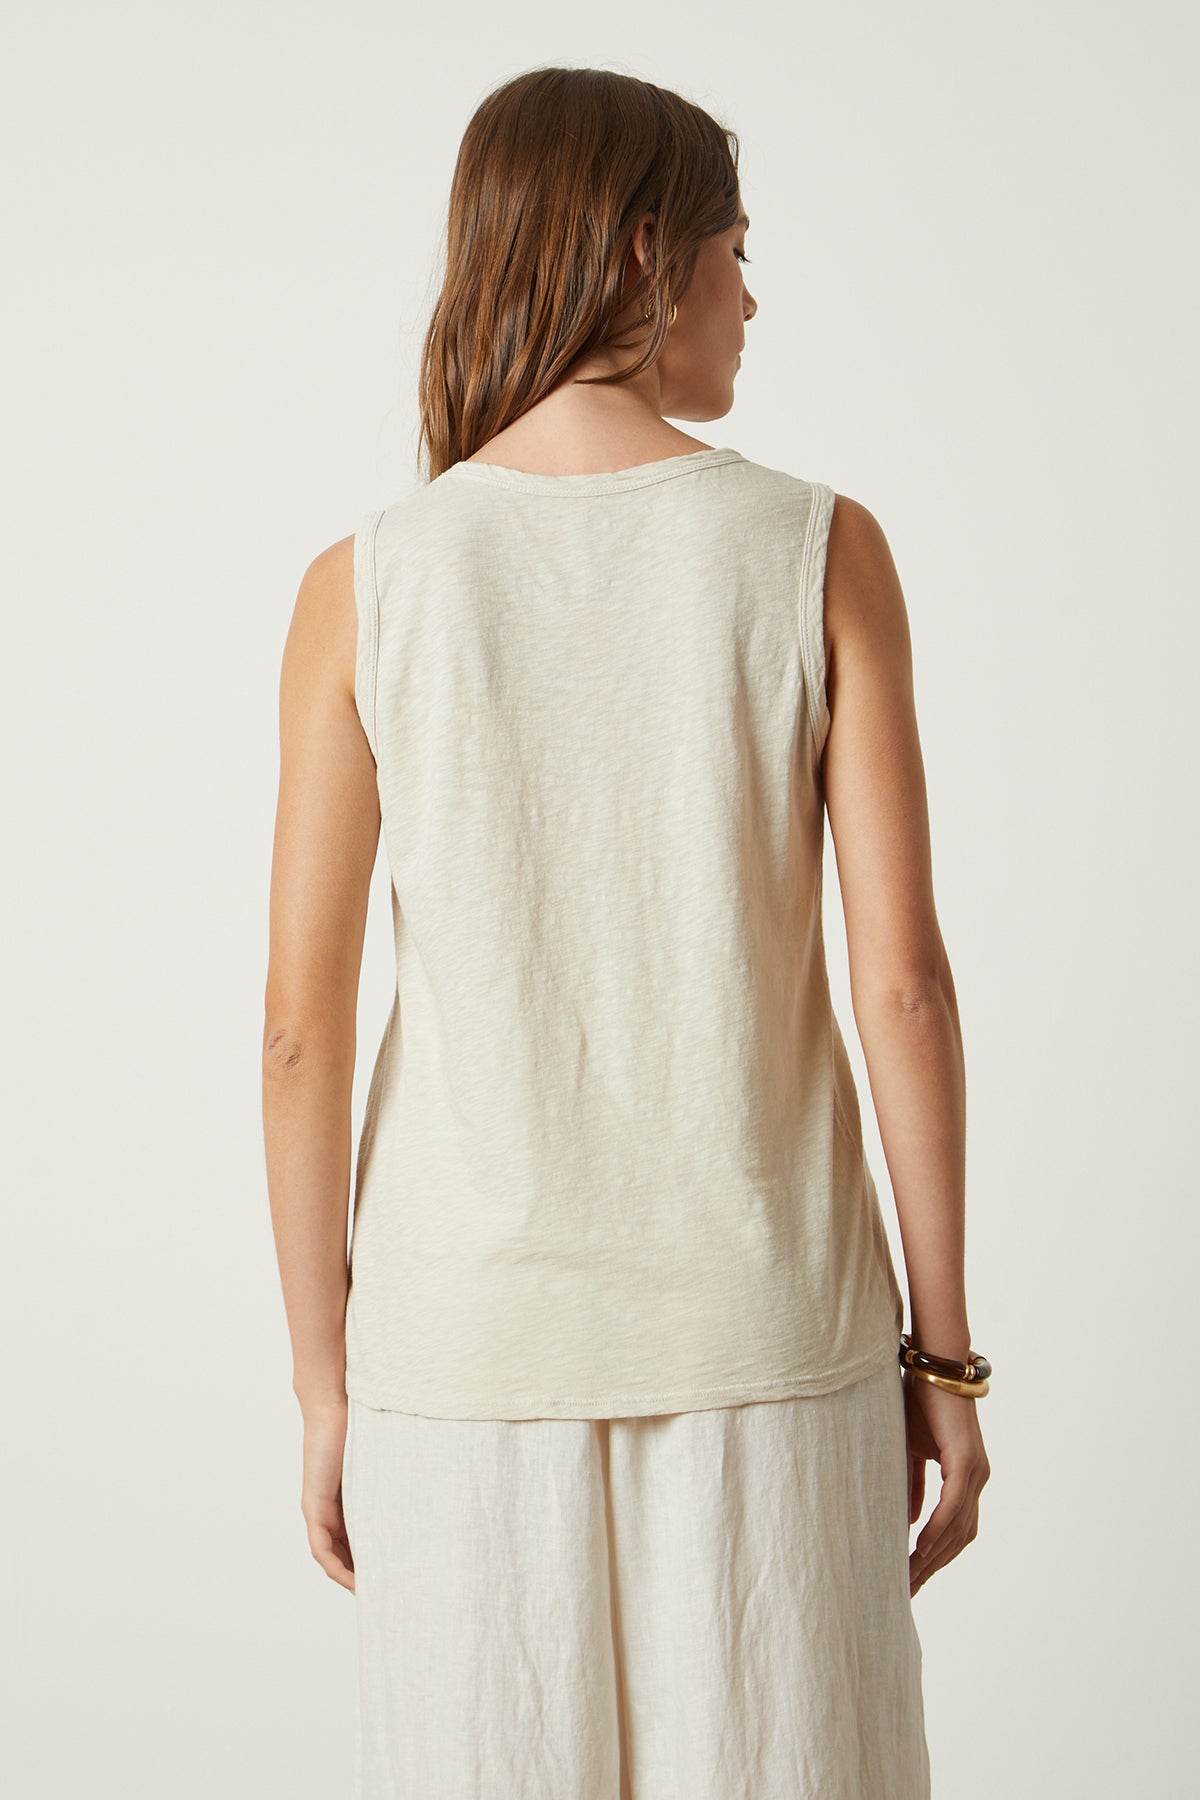 The back view of a woman wearing a Velvet by Graham & Spencer TAURUS COTTON SLUB TANK.-26022825066689